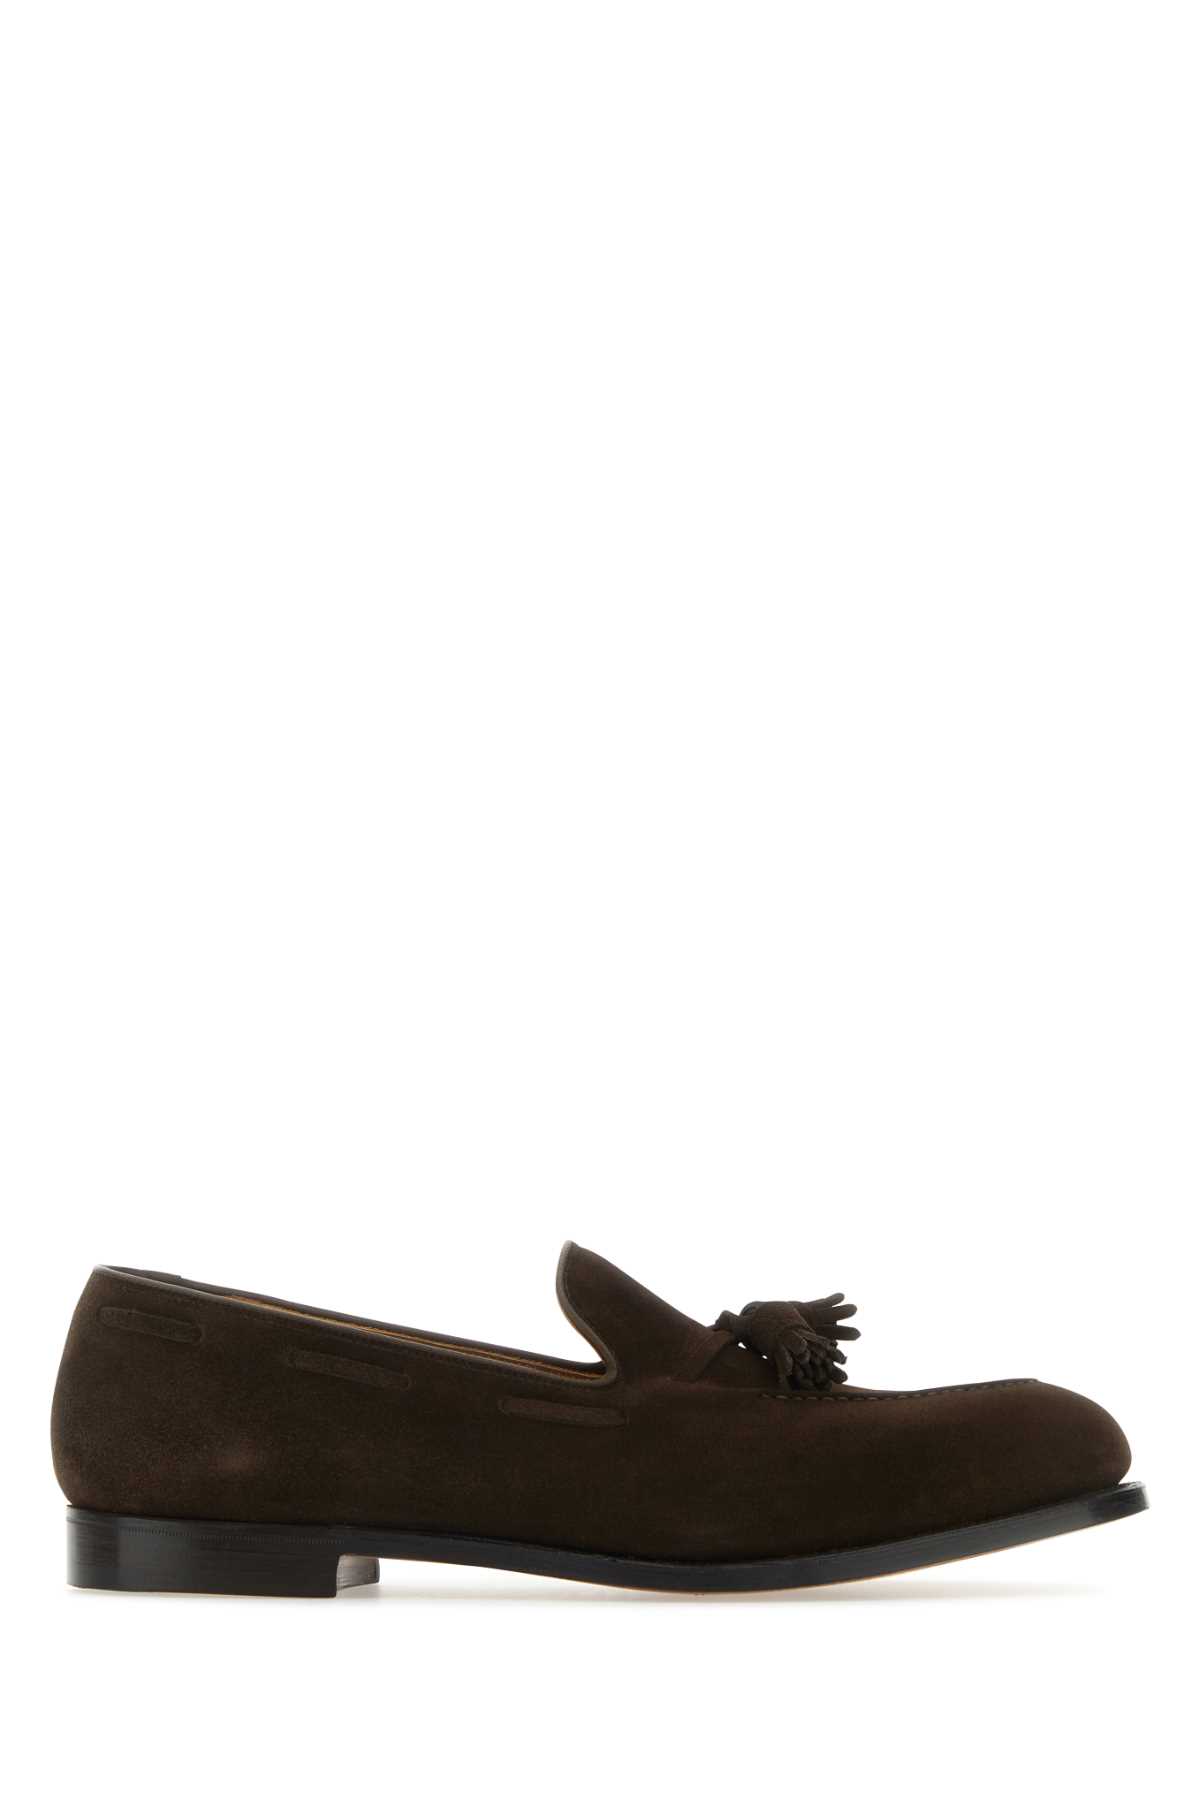 Chocolate Suede Cavendish 2 Loafers